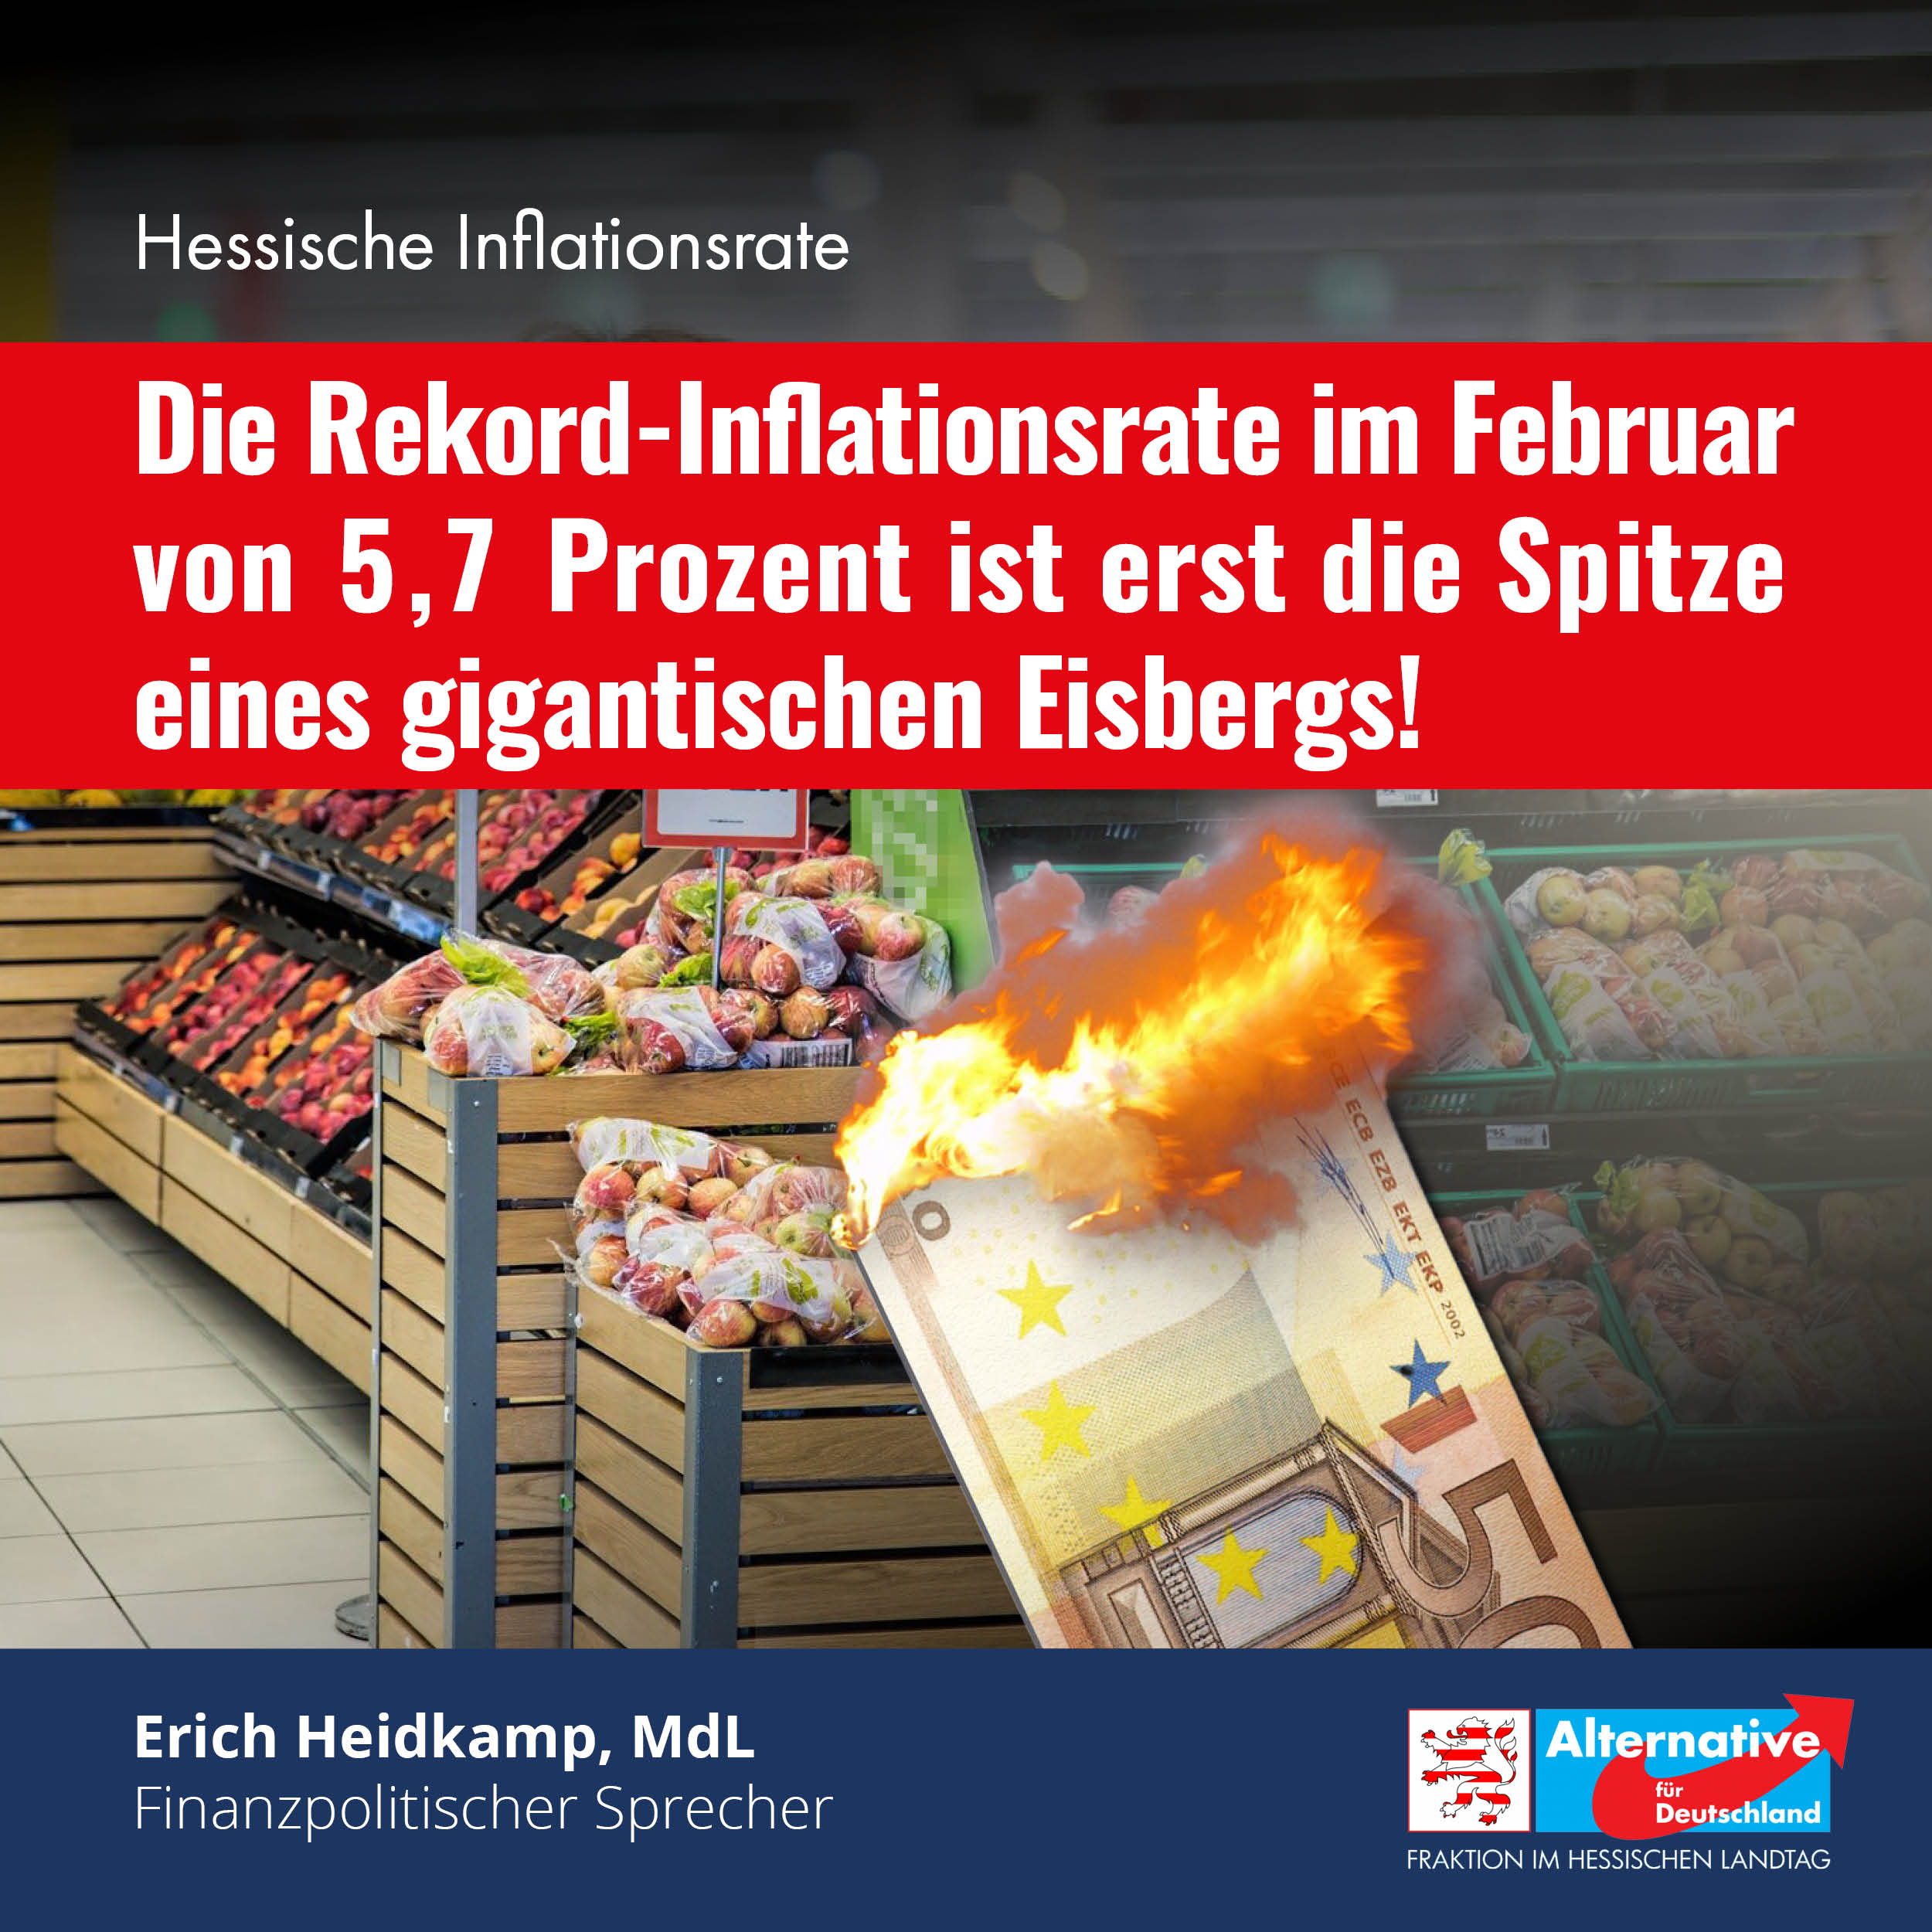 Inflationsrate